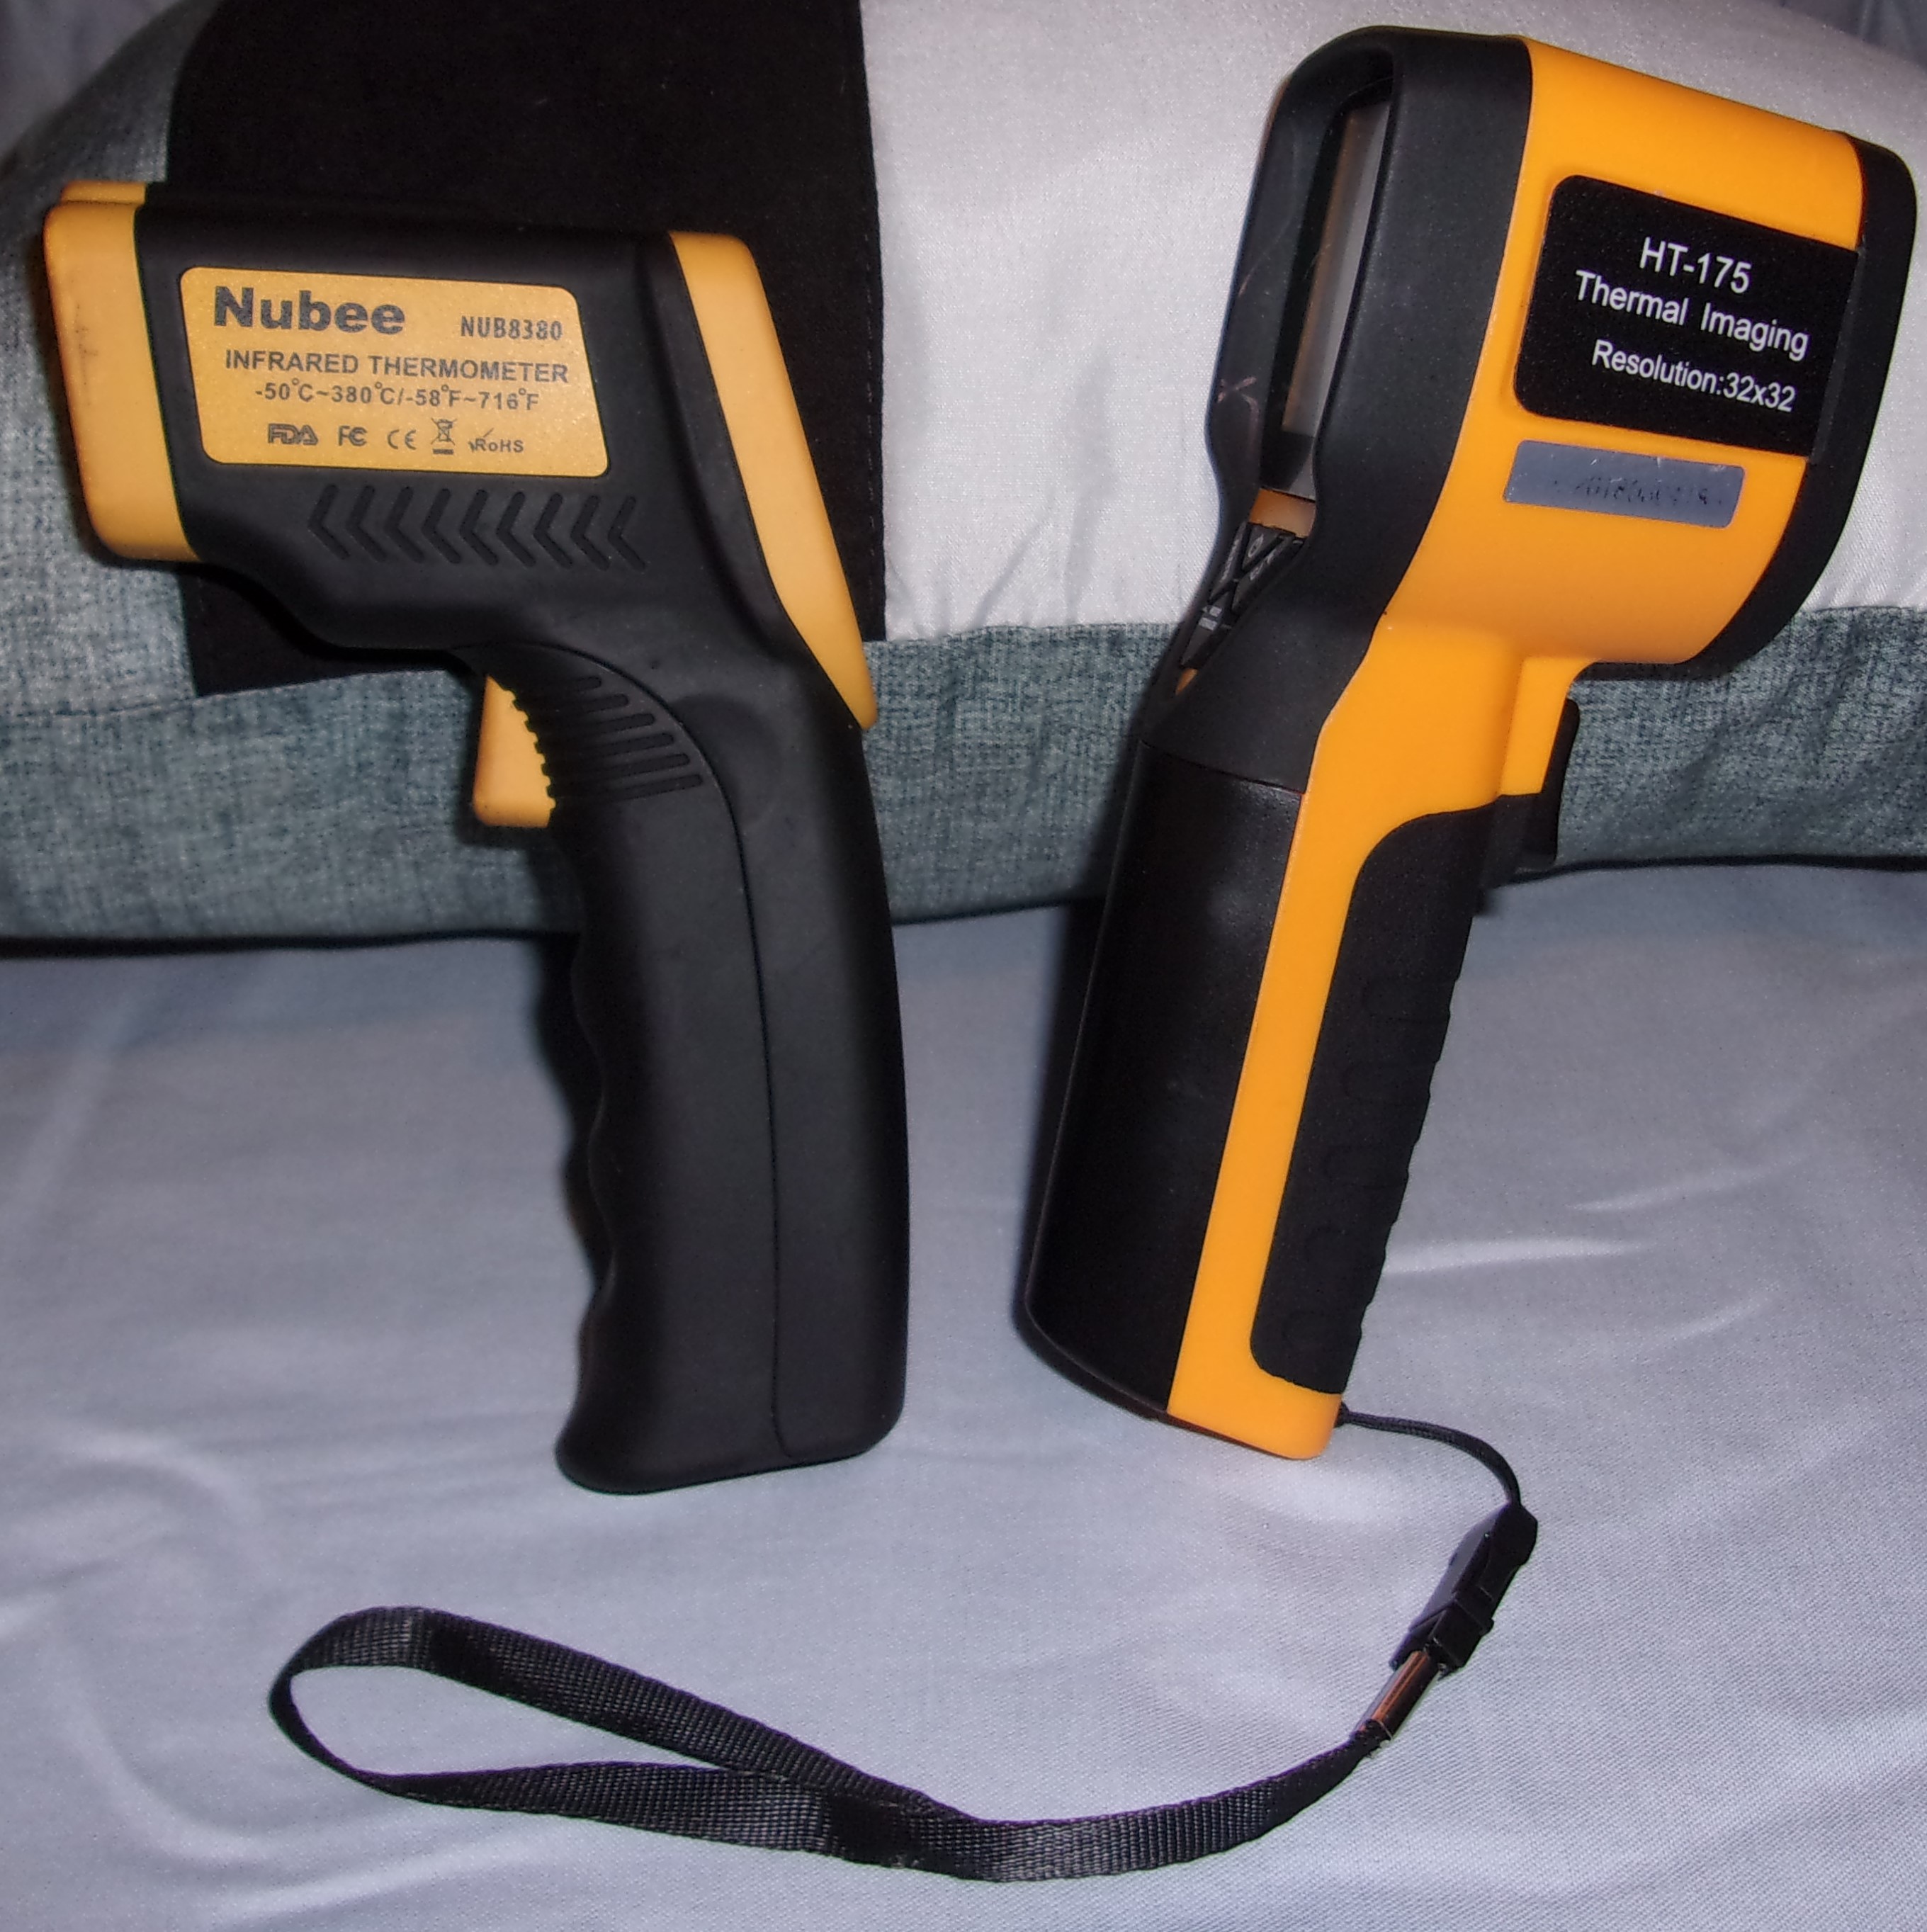 IR Thermometer and Short-Ranger Imager